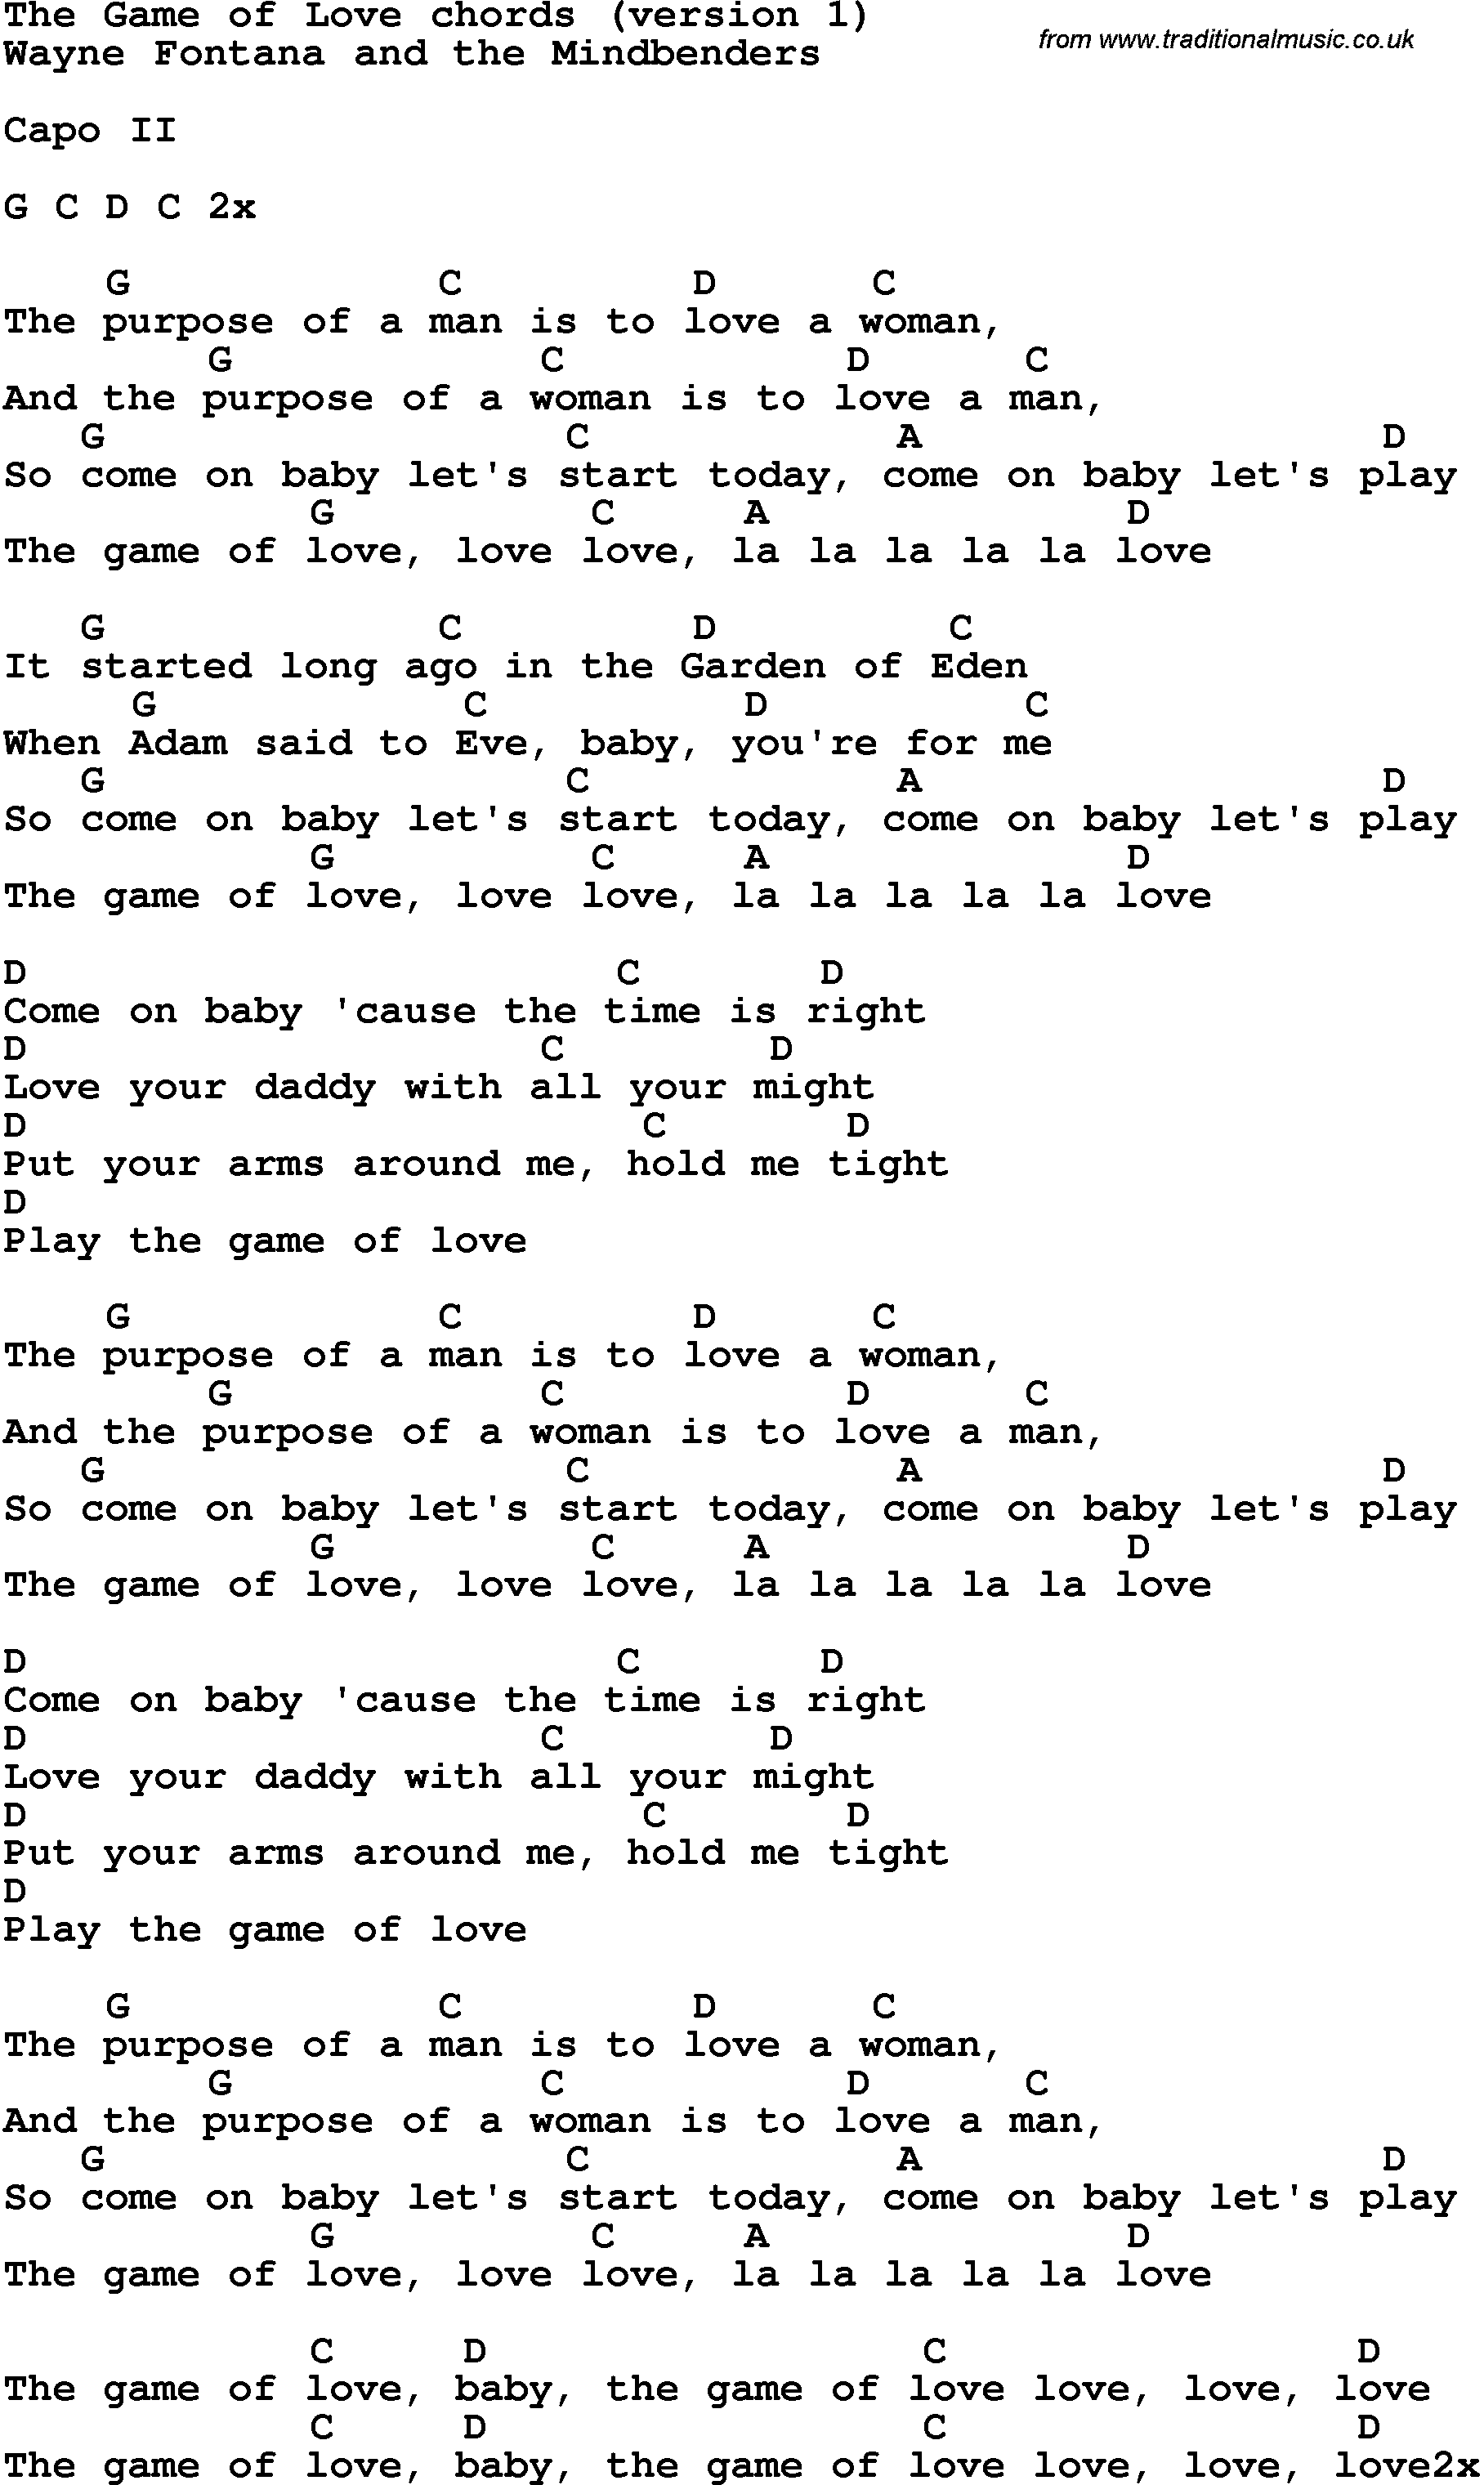 Song Lyrics with guitar chords for The Game Of Love - Wayne Fontana And The Mindbenders